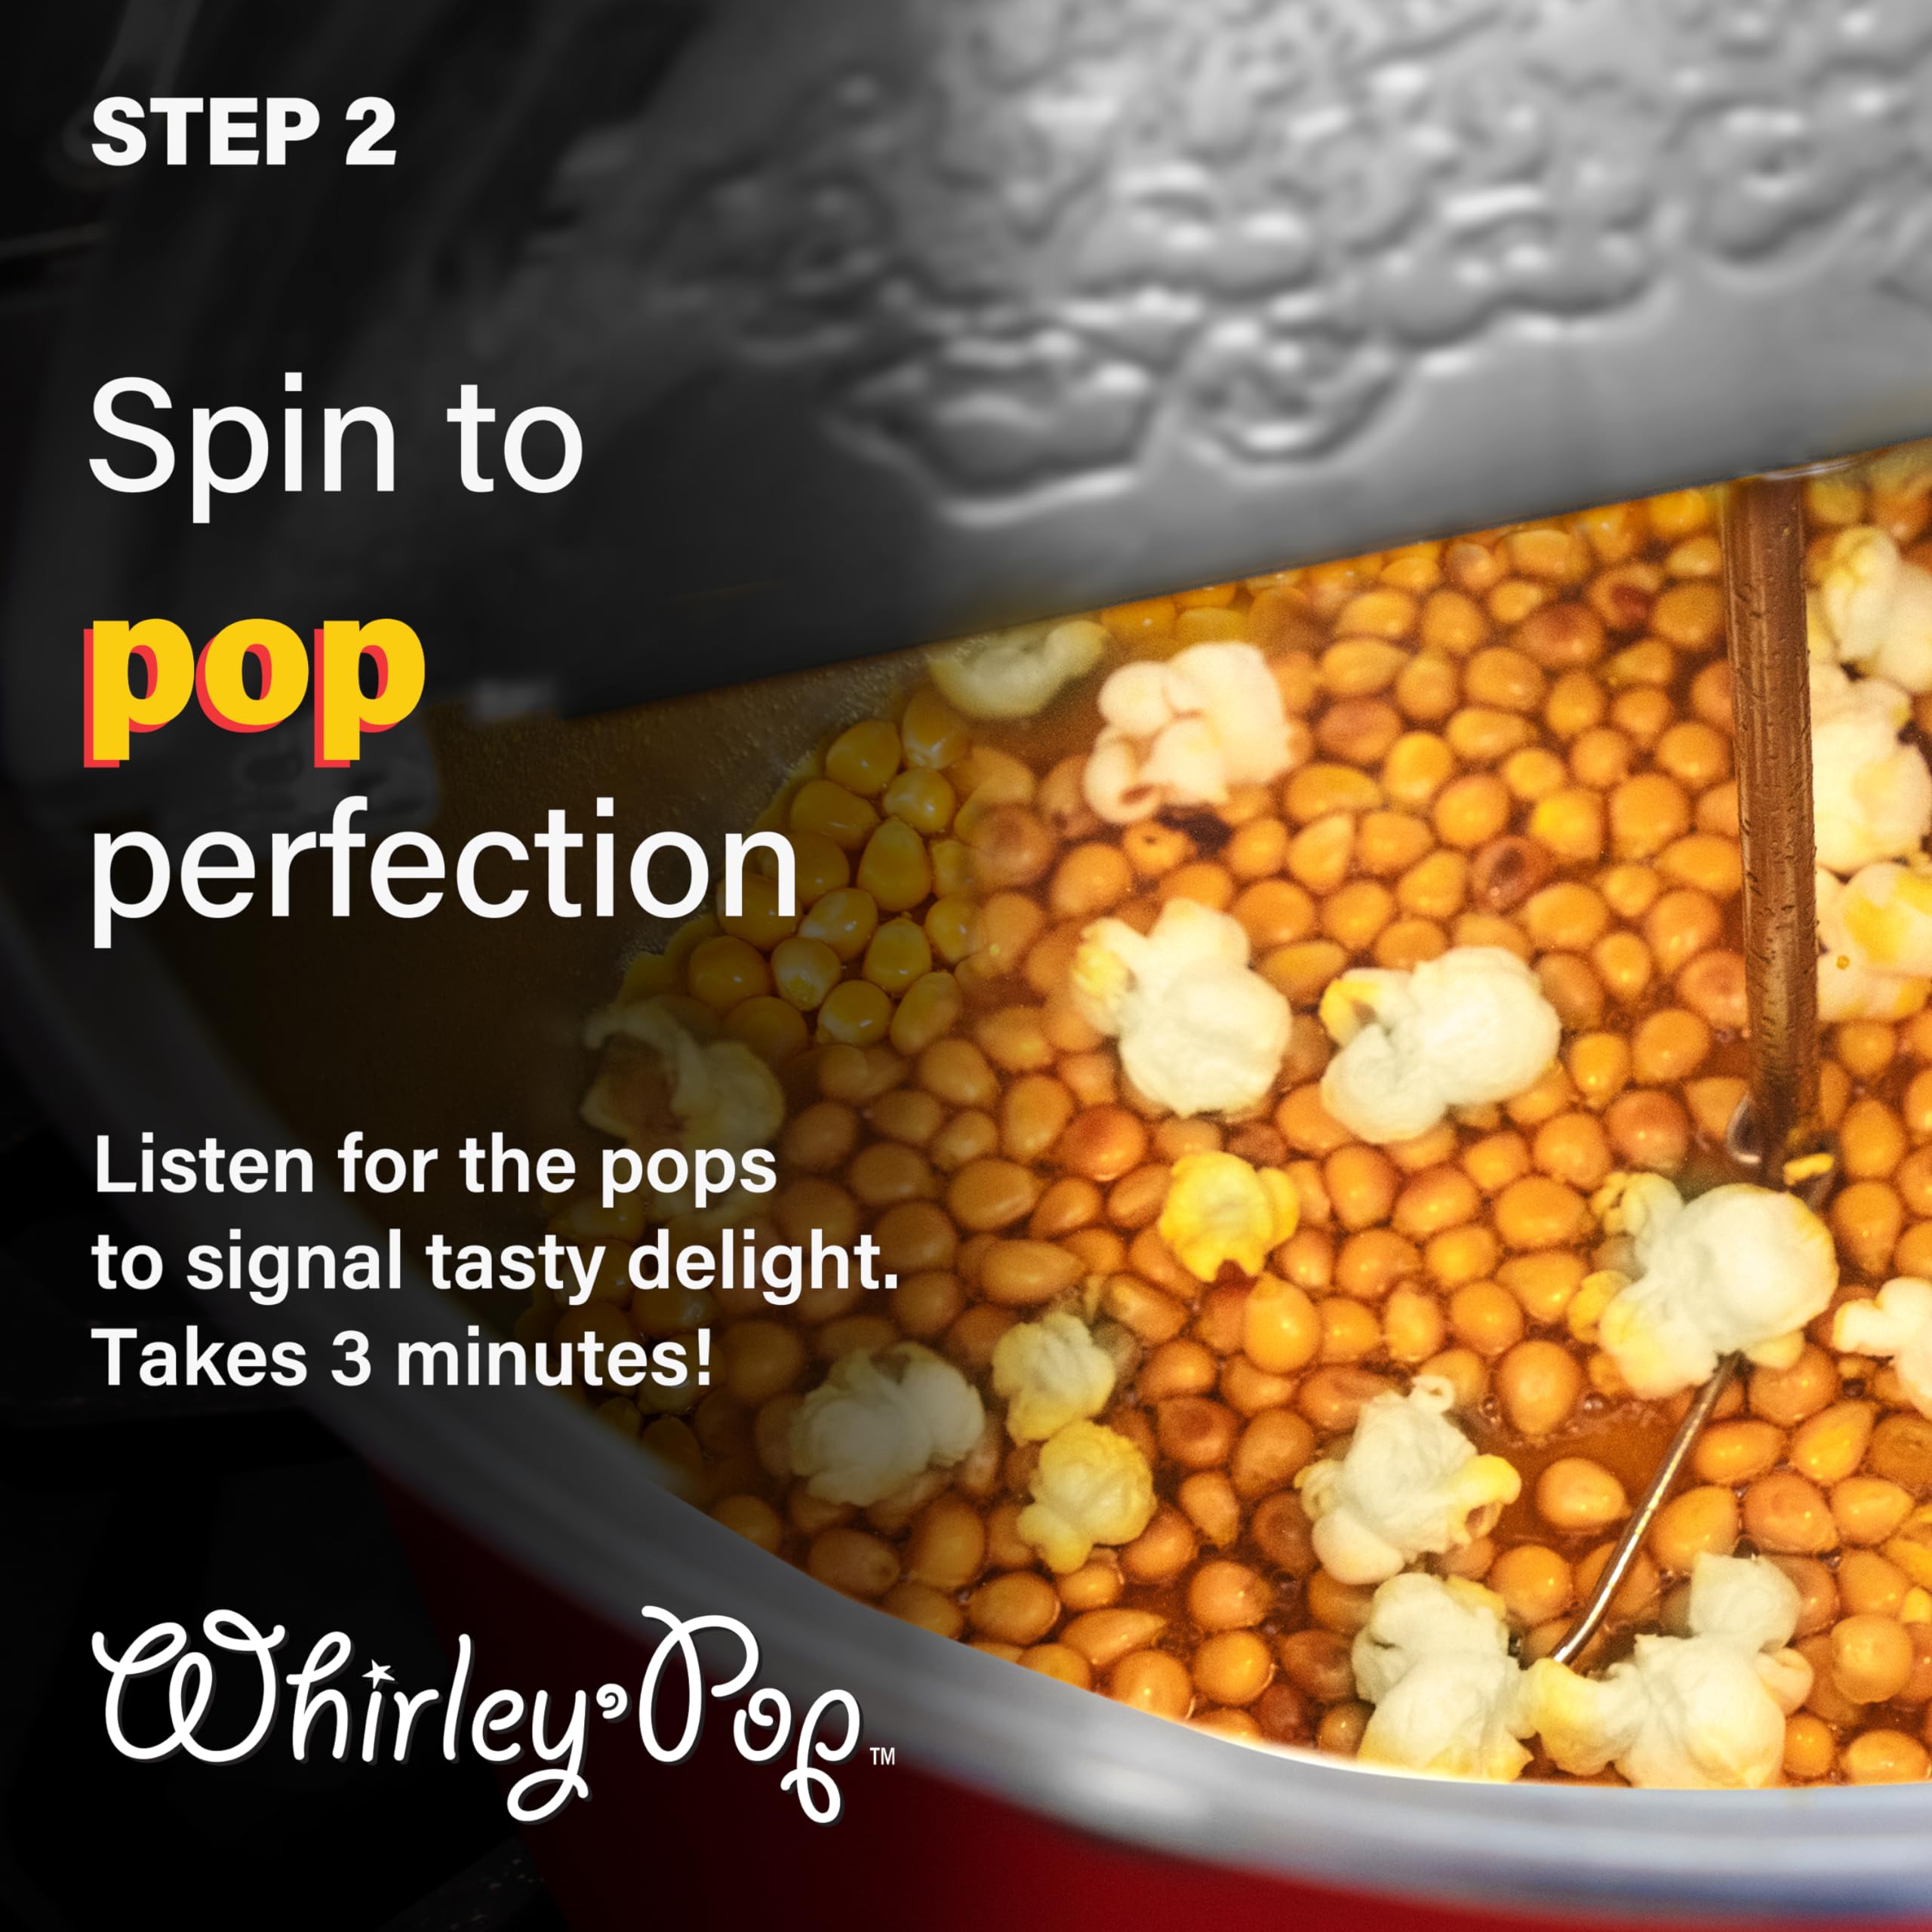 Original Whirley Pop Popcorn Maker - 6 Quart Stovetop Popcorn Popper With Five Popping Kits, Aluminum Popcorn Pot With Metal Gears, Wabash Valley Farms Stove Top Popcorn Maker, Popcorn Pan (Silver)